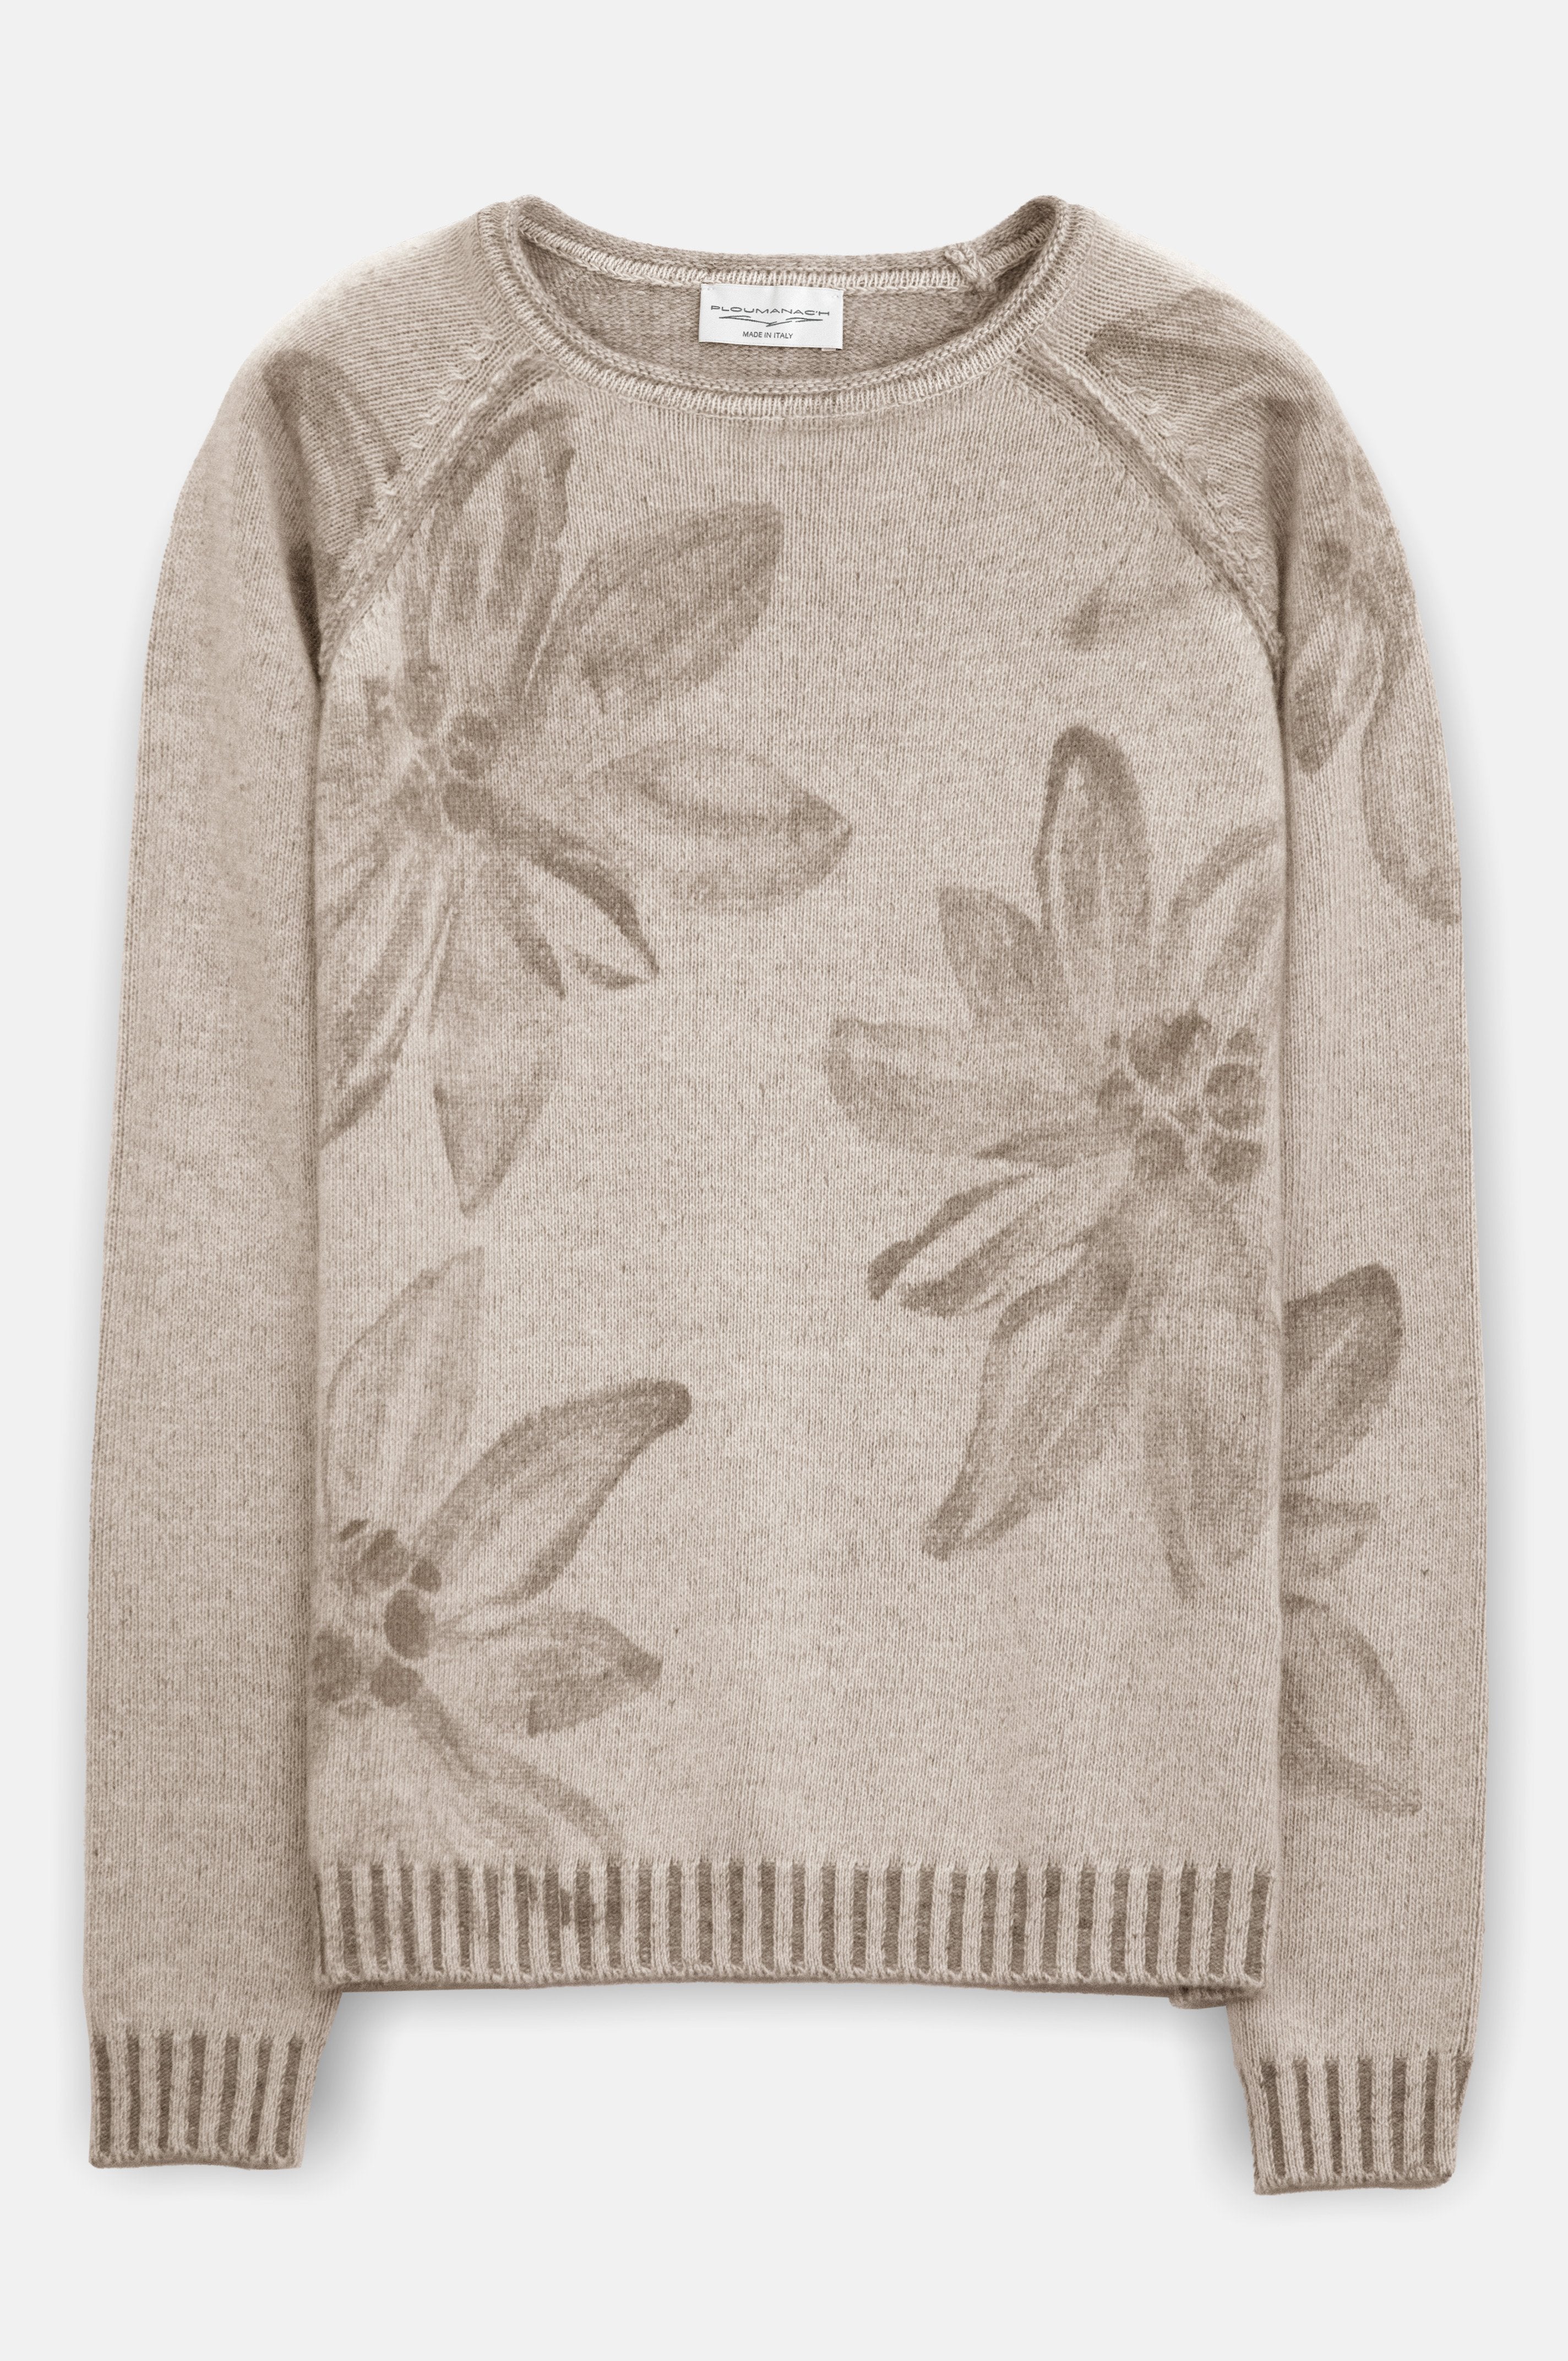 Clett Edel Wood - Hand Painted Plated Crew Neck Sweater - 